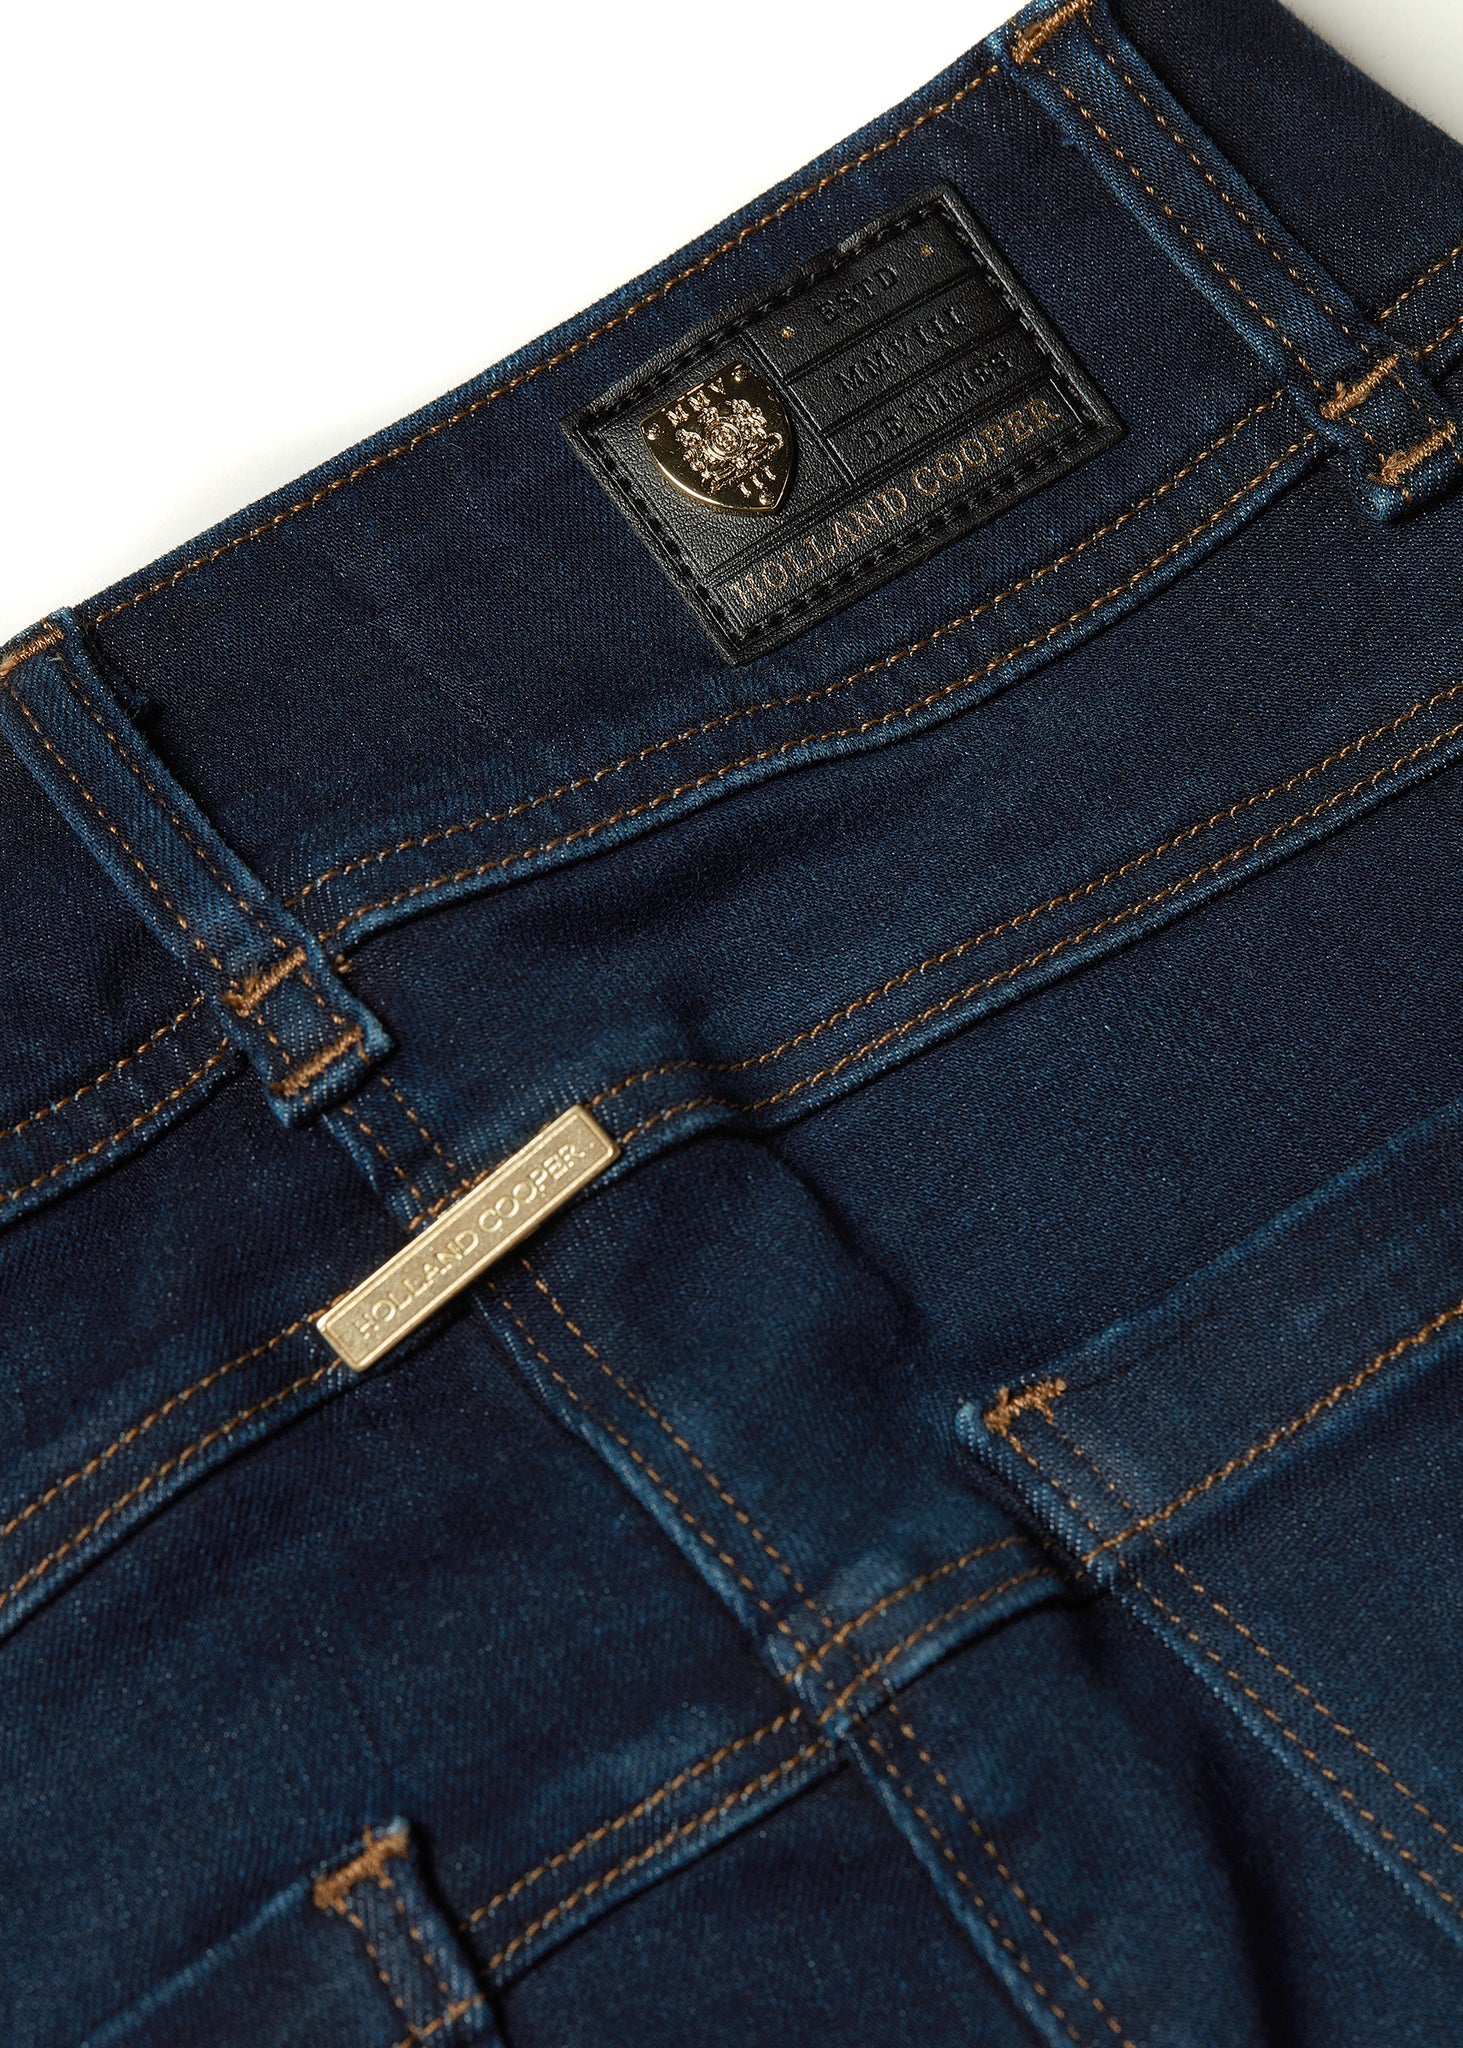 gold hardware detail on back of womens high rise dark blue denim skinny stretch thermal jean with jodhpur style seams and two open pockets to the front and back with internal fleece lining and hc gold crest on front right pocket